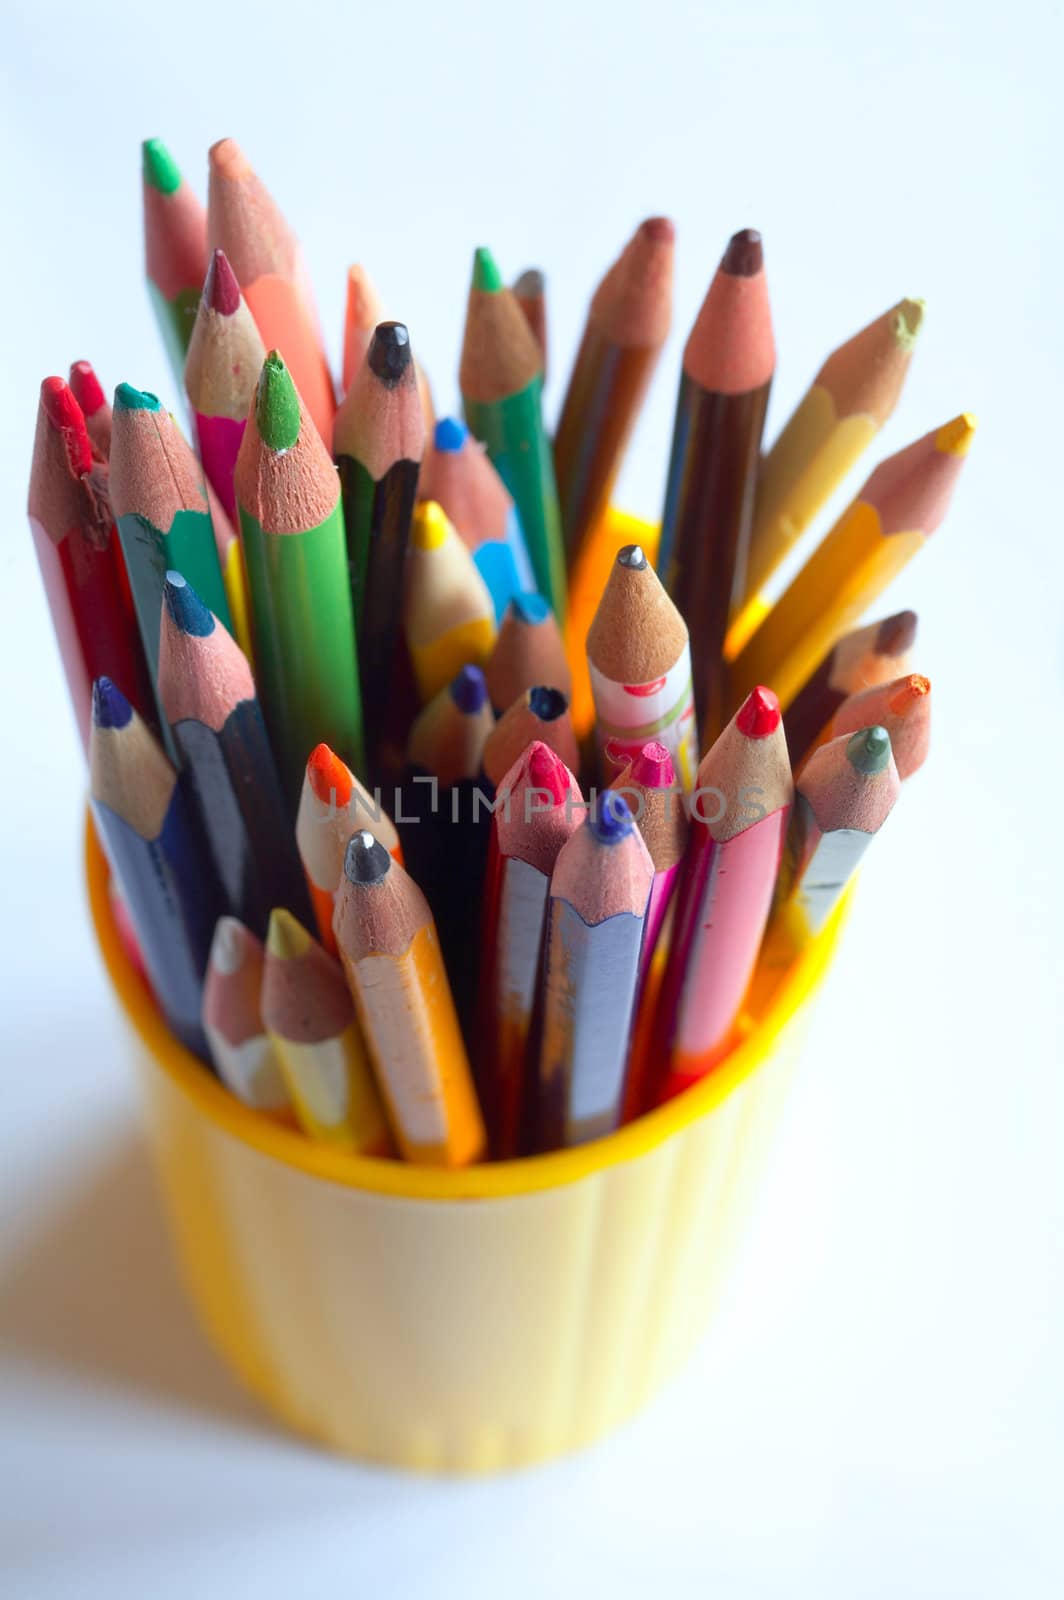 An image of various colored pencils in a plastic glass